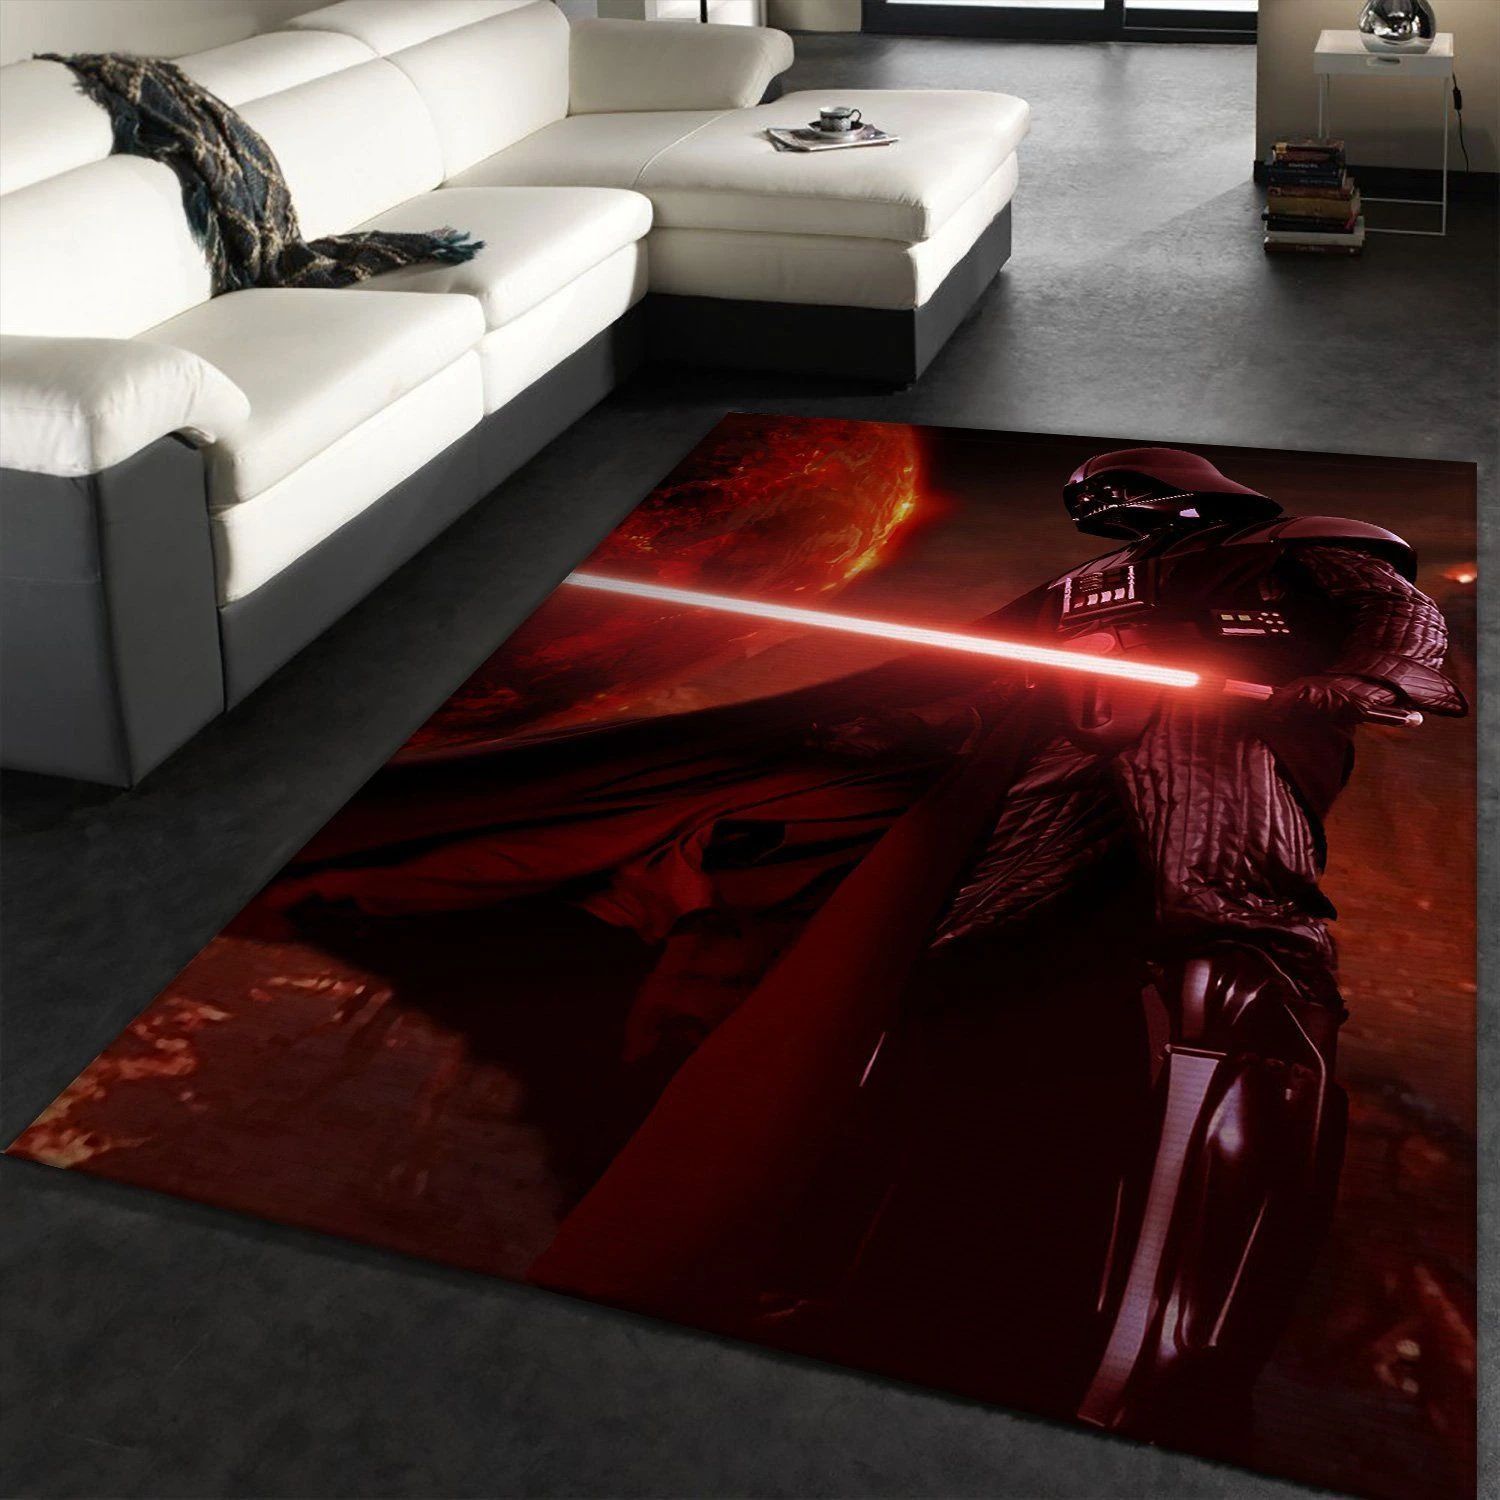 Darth Vader With Light Saber Star Wars Area Rugs Living Room Carpet Christmas Gift Floor Decor The US Decor - Indoor Outdoor Rugs 1